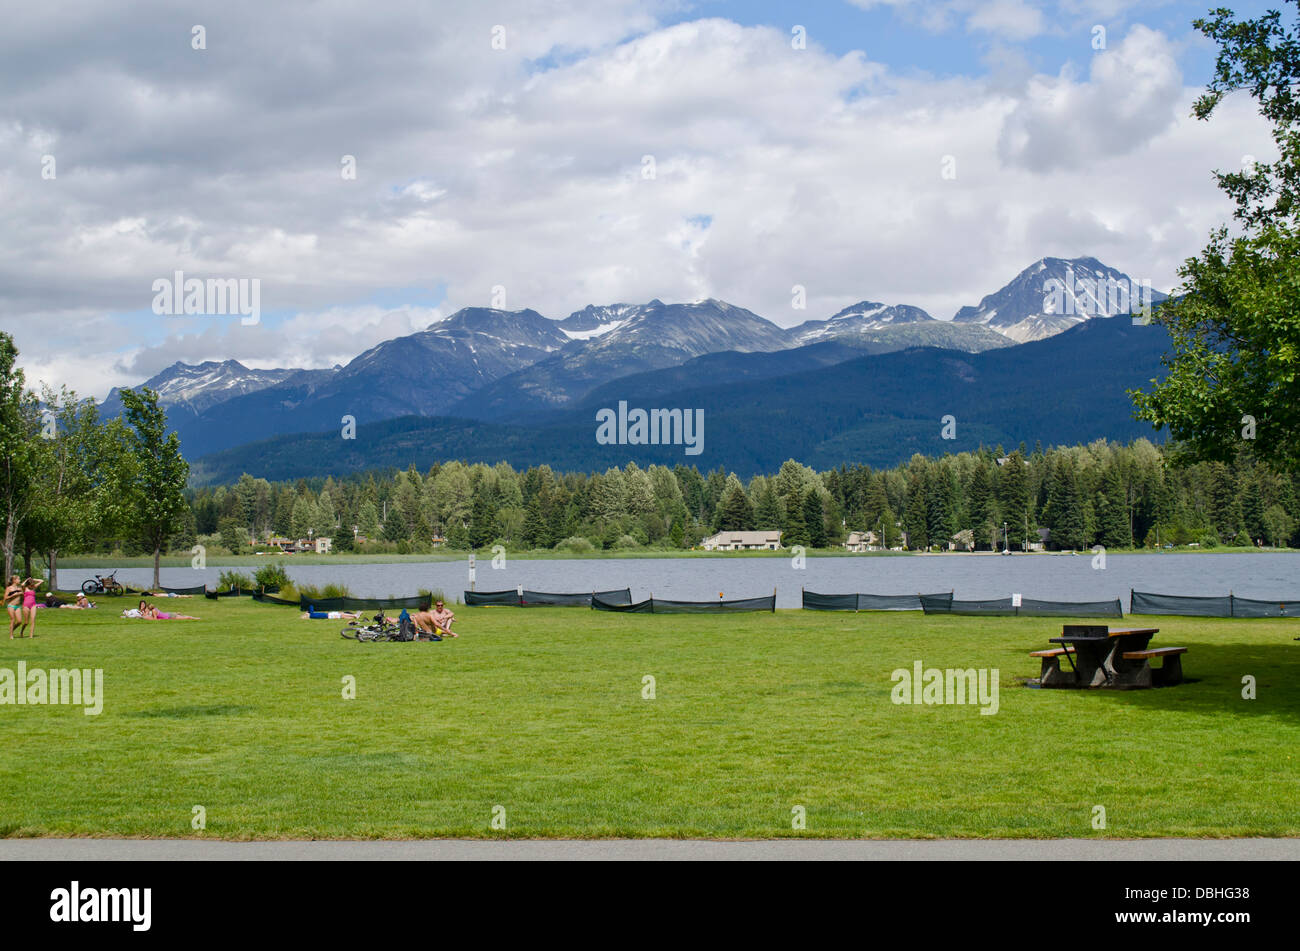 Green lawn, sunbathers and picnic tables at Rainbow Park on Alta Lake in Whistler, Canada.  Forest and mountains in the distance Stock Photo